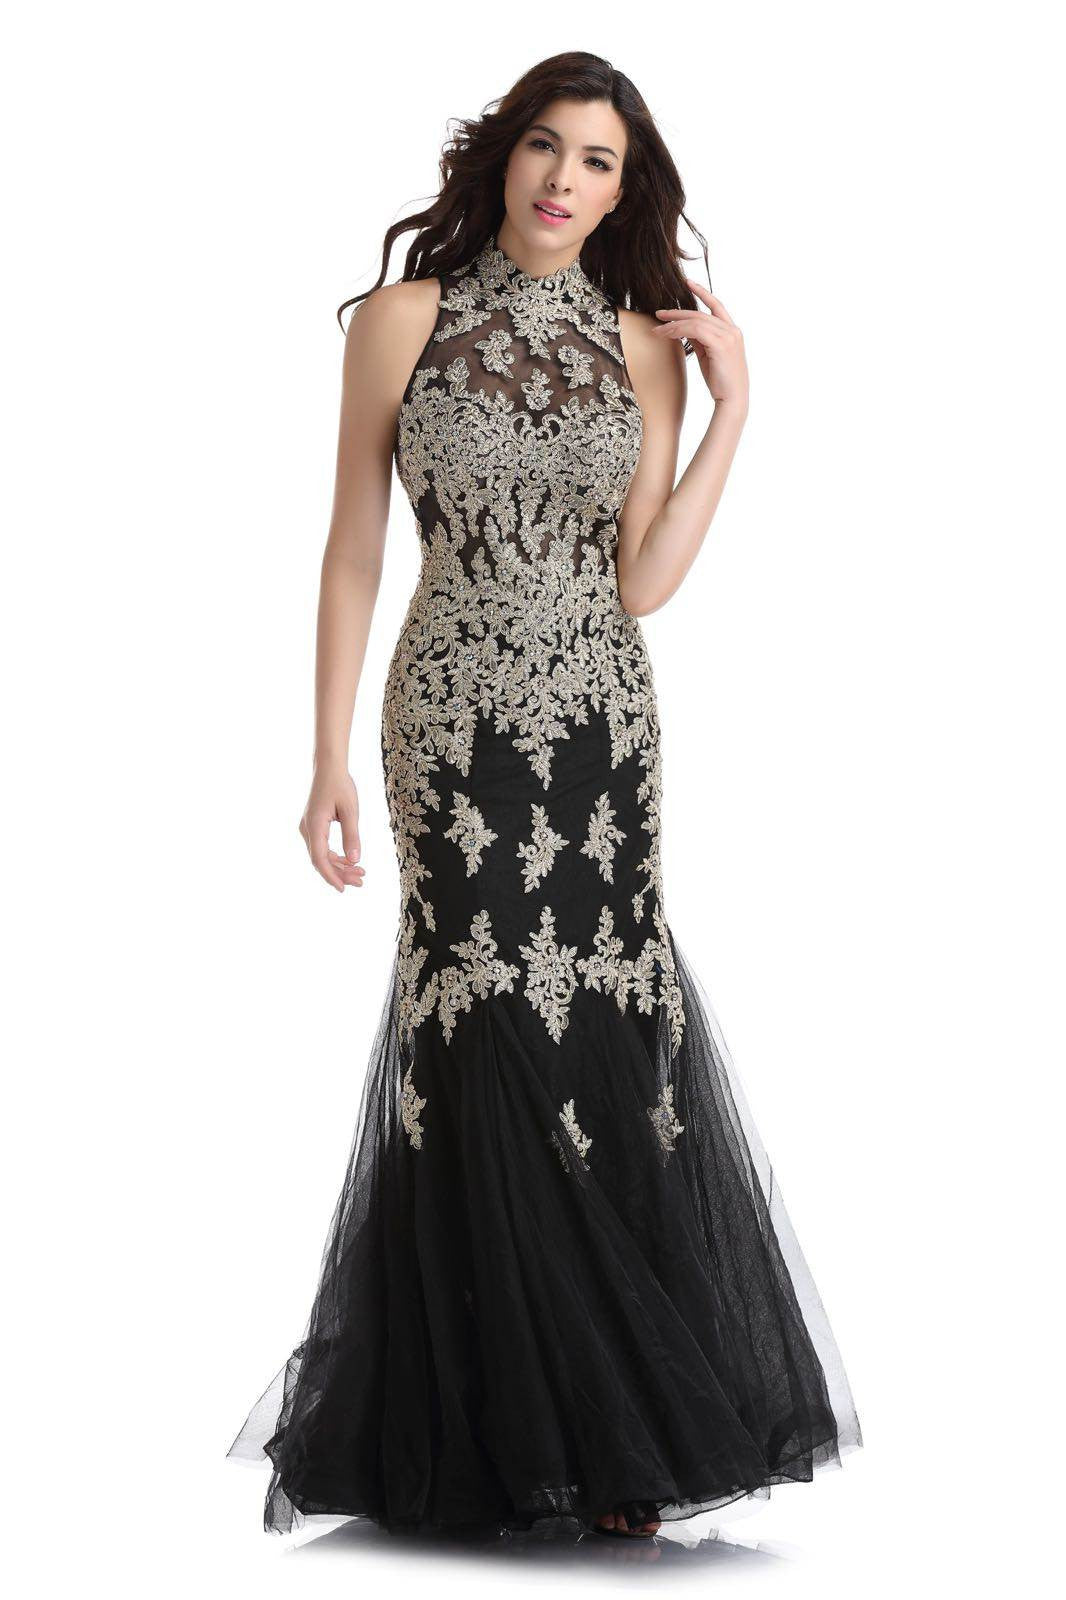 Elegant Trumpet Style Gown adorned with Crystal Applique